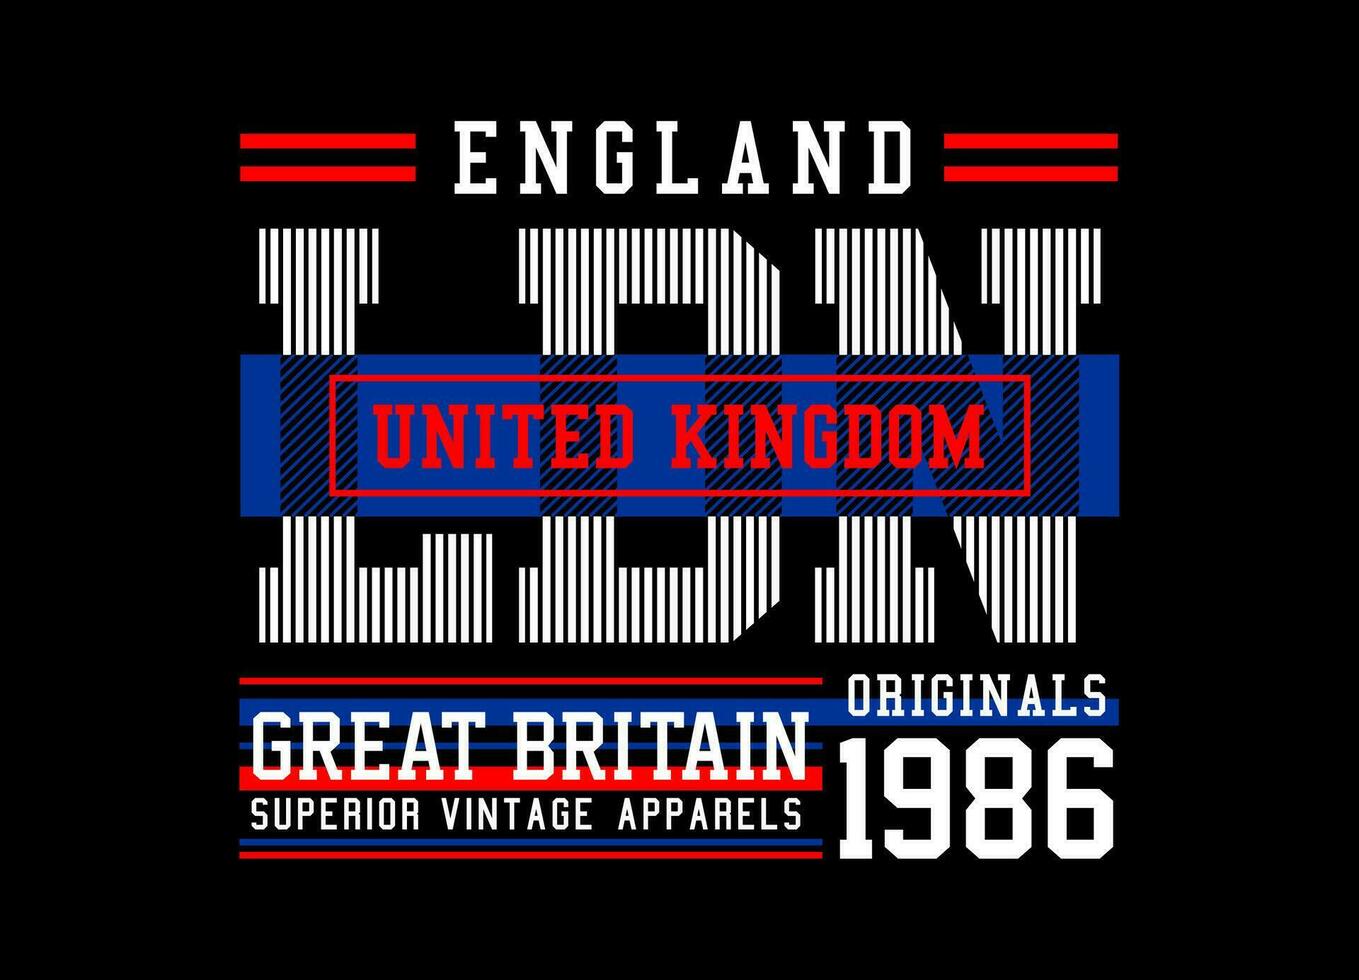 England typography design, for print on t shirts etc. vector